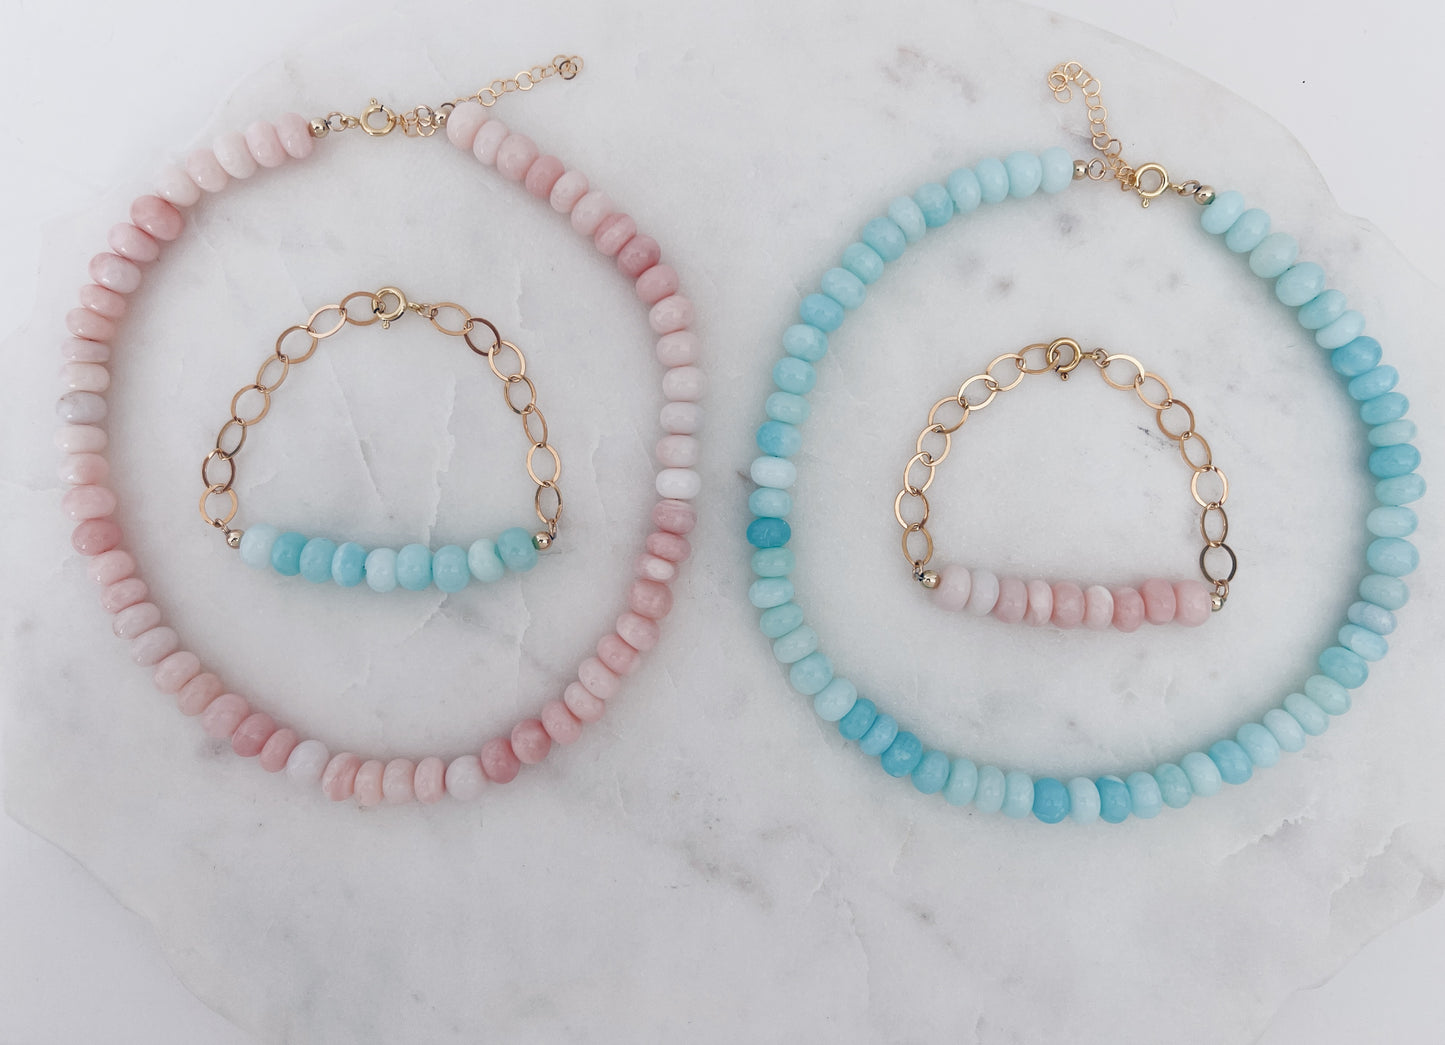 Opal Choker Necklace + More Options